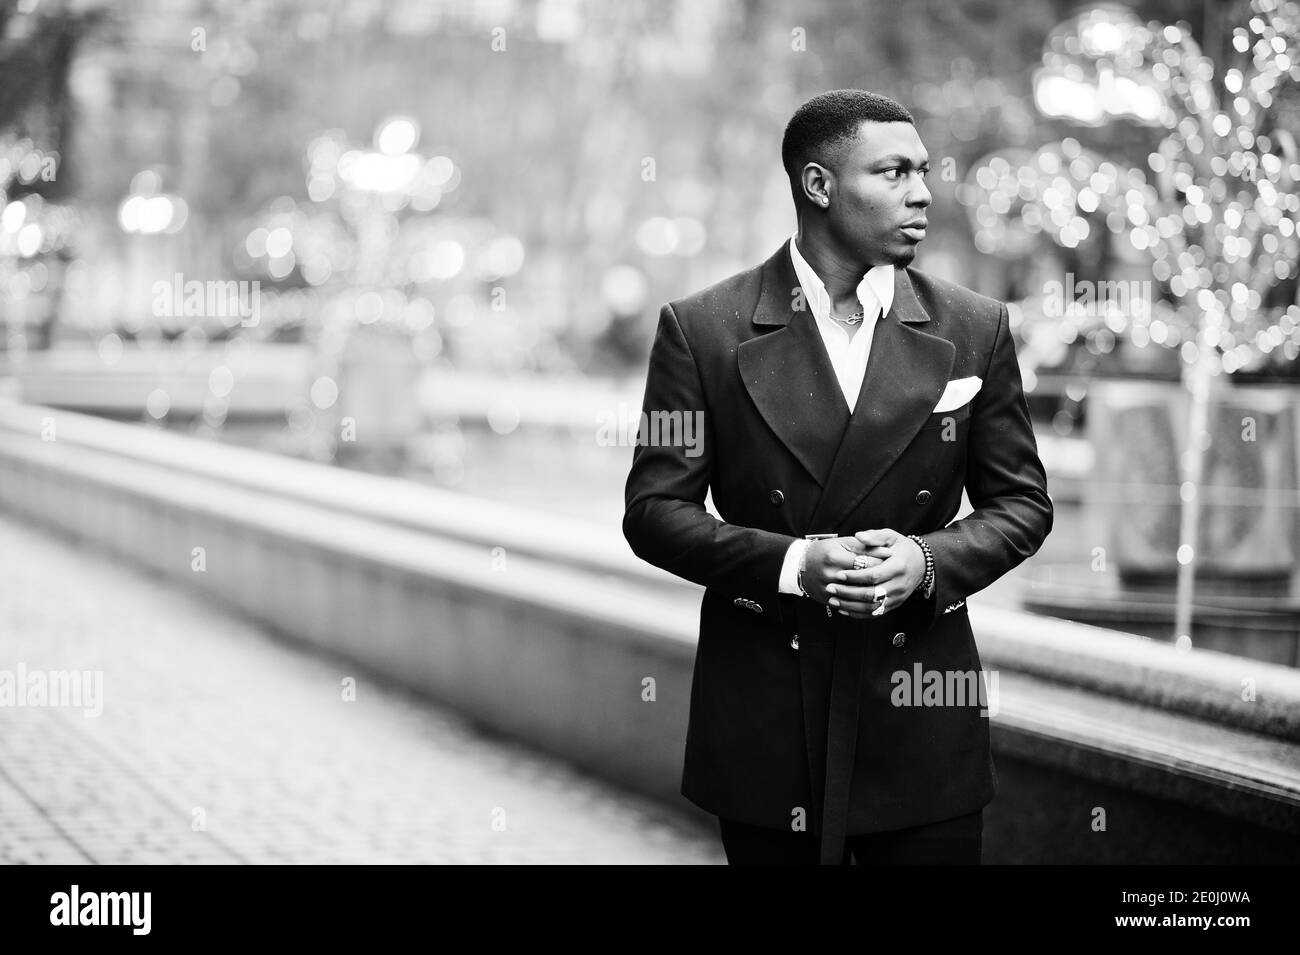 Portrait of young and handsome african american businessman in suit walking on cemter of city with garlands. Stock Photo